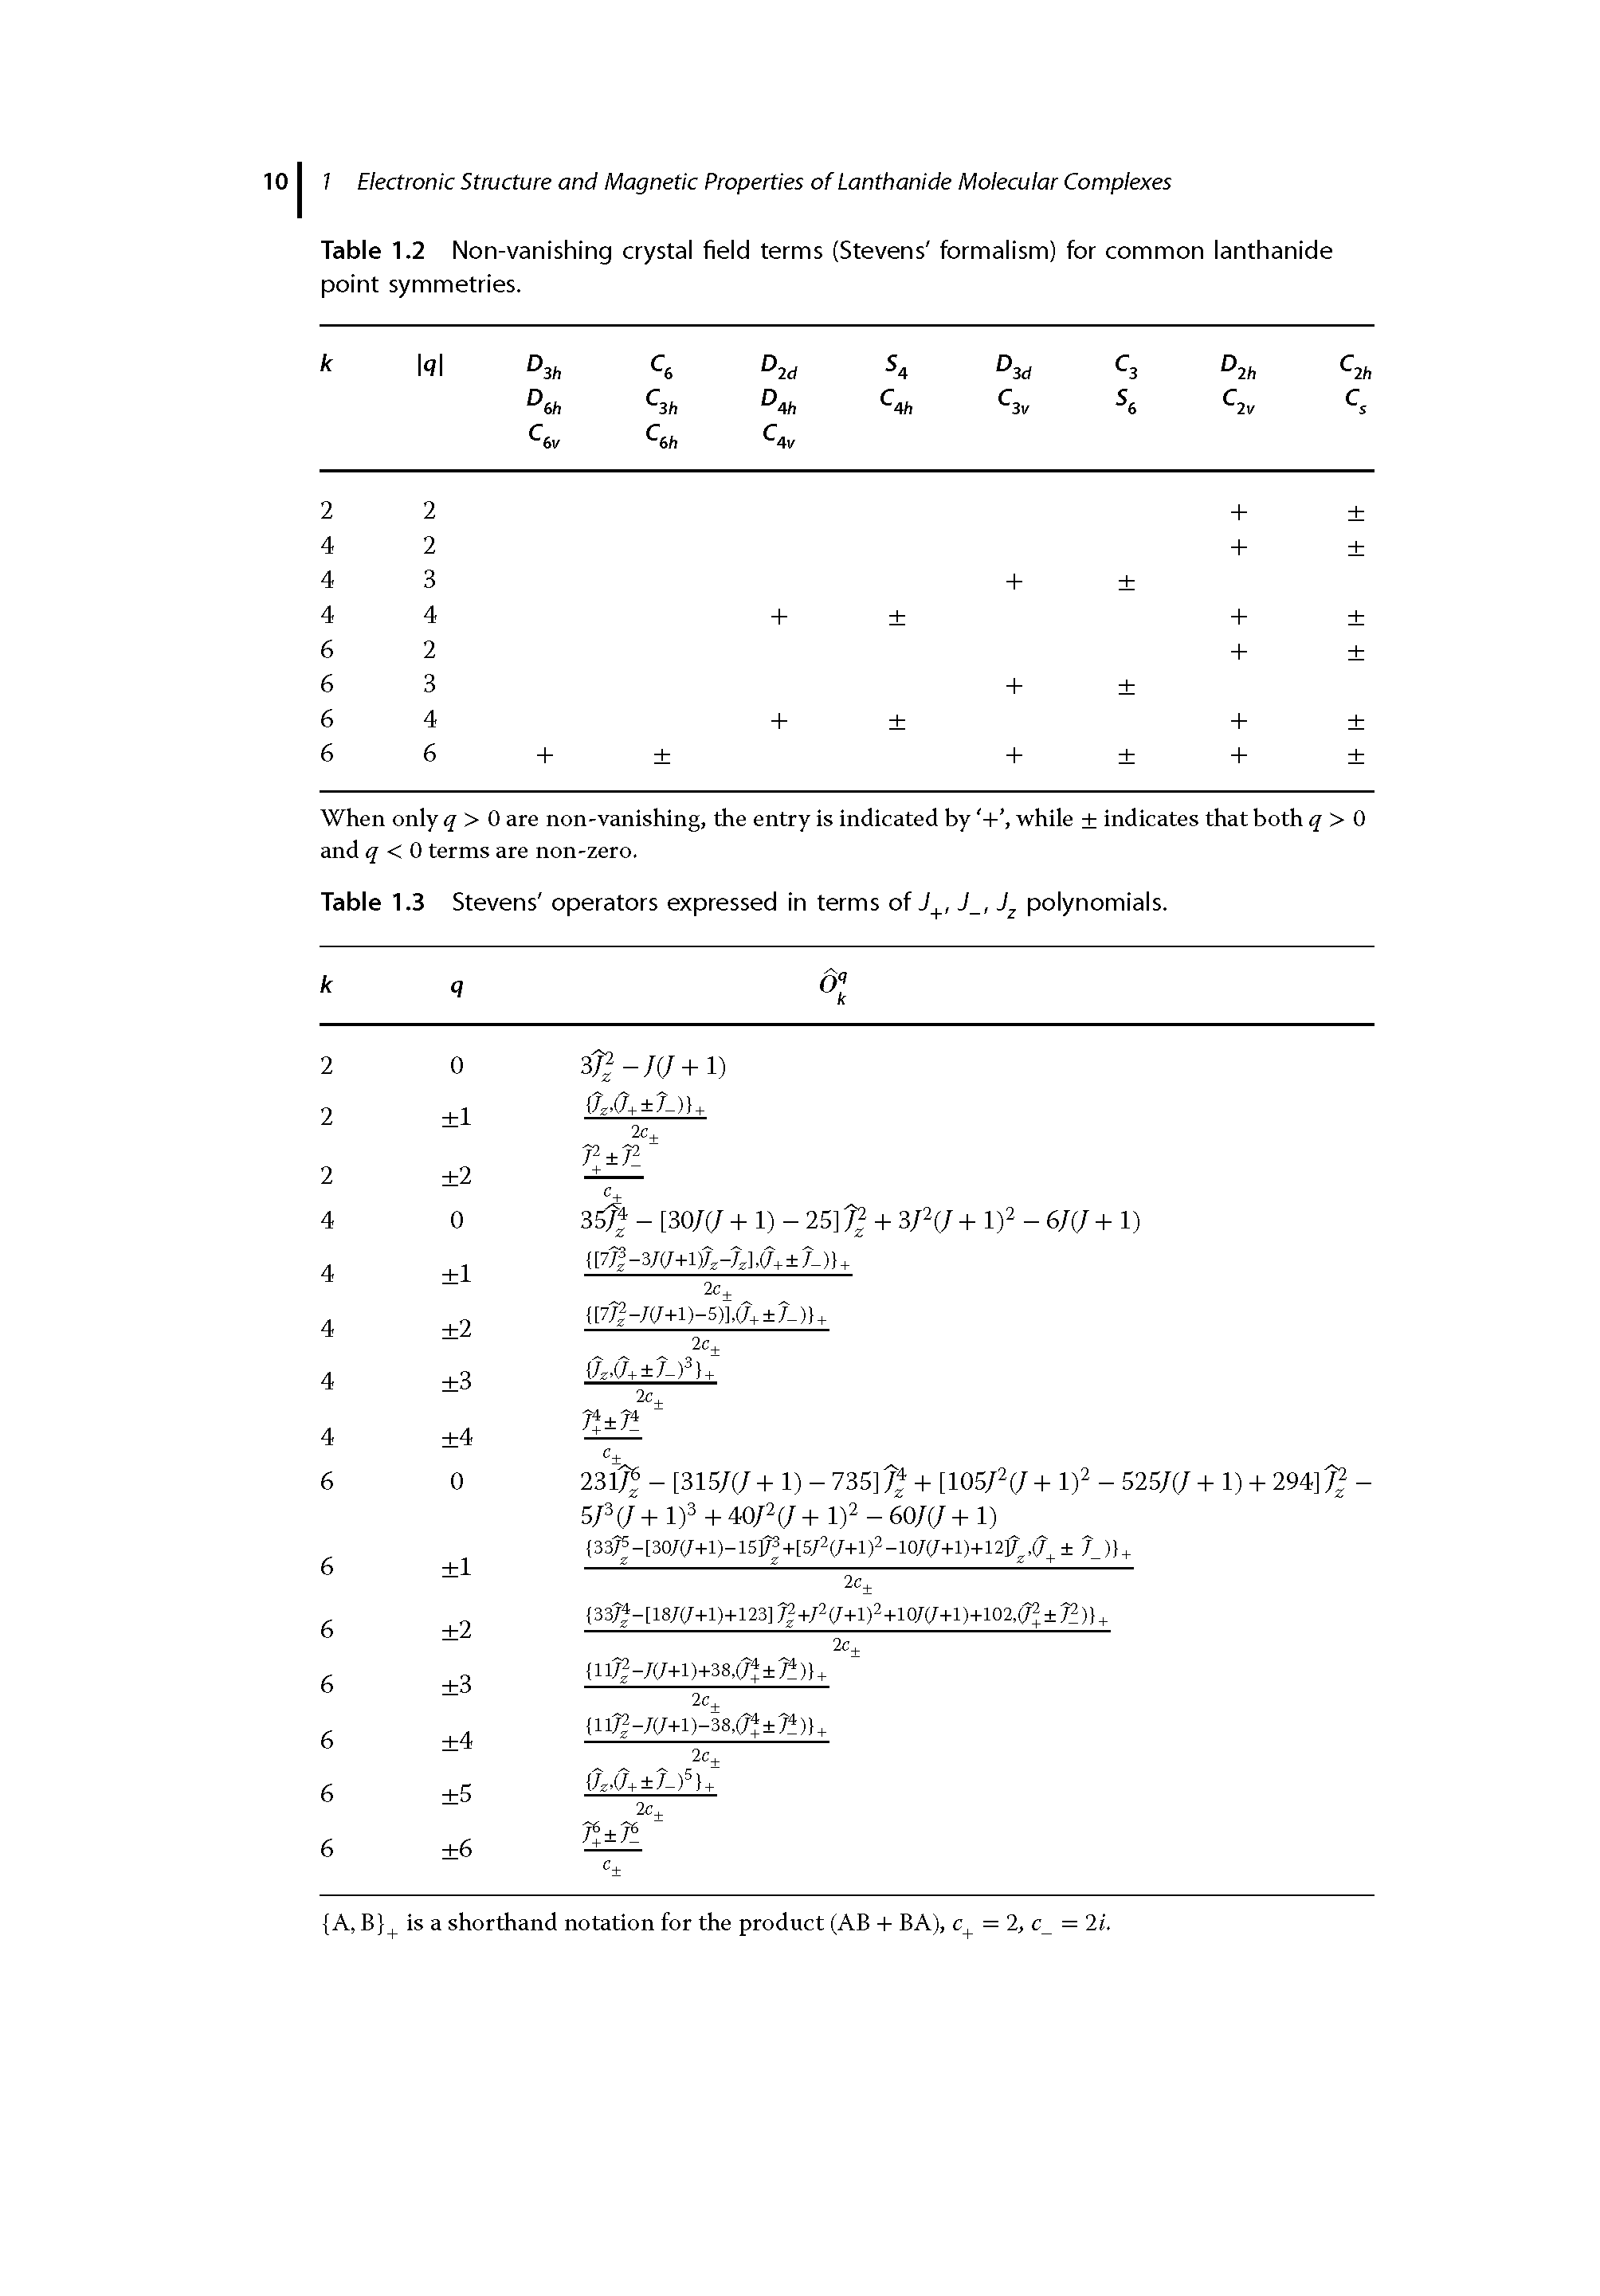 Table 1.2 Non-vanishing crystal field terms (Stevens formalism) for common lanthanide point symmetries.